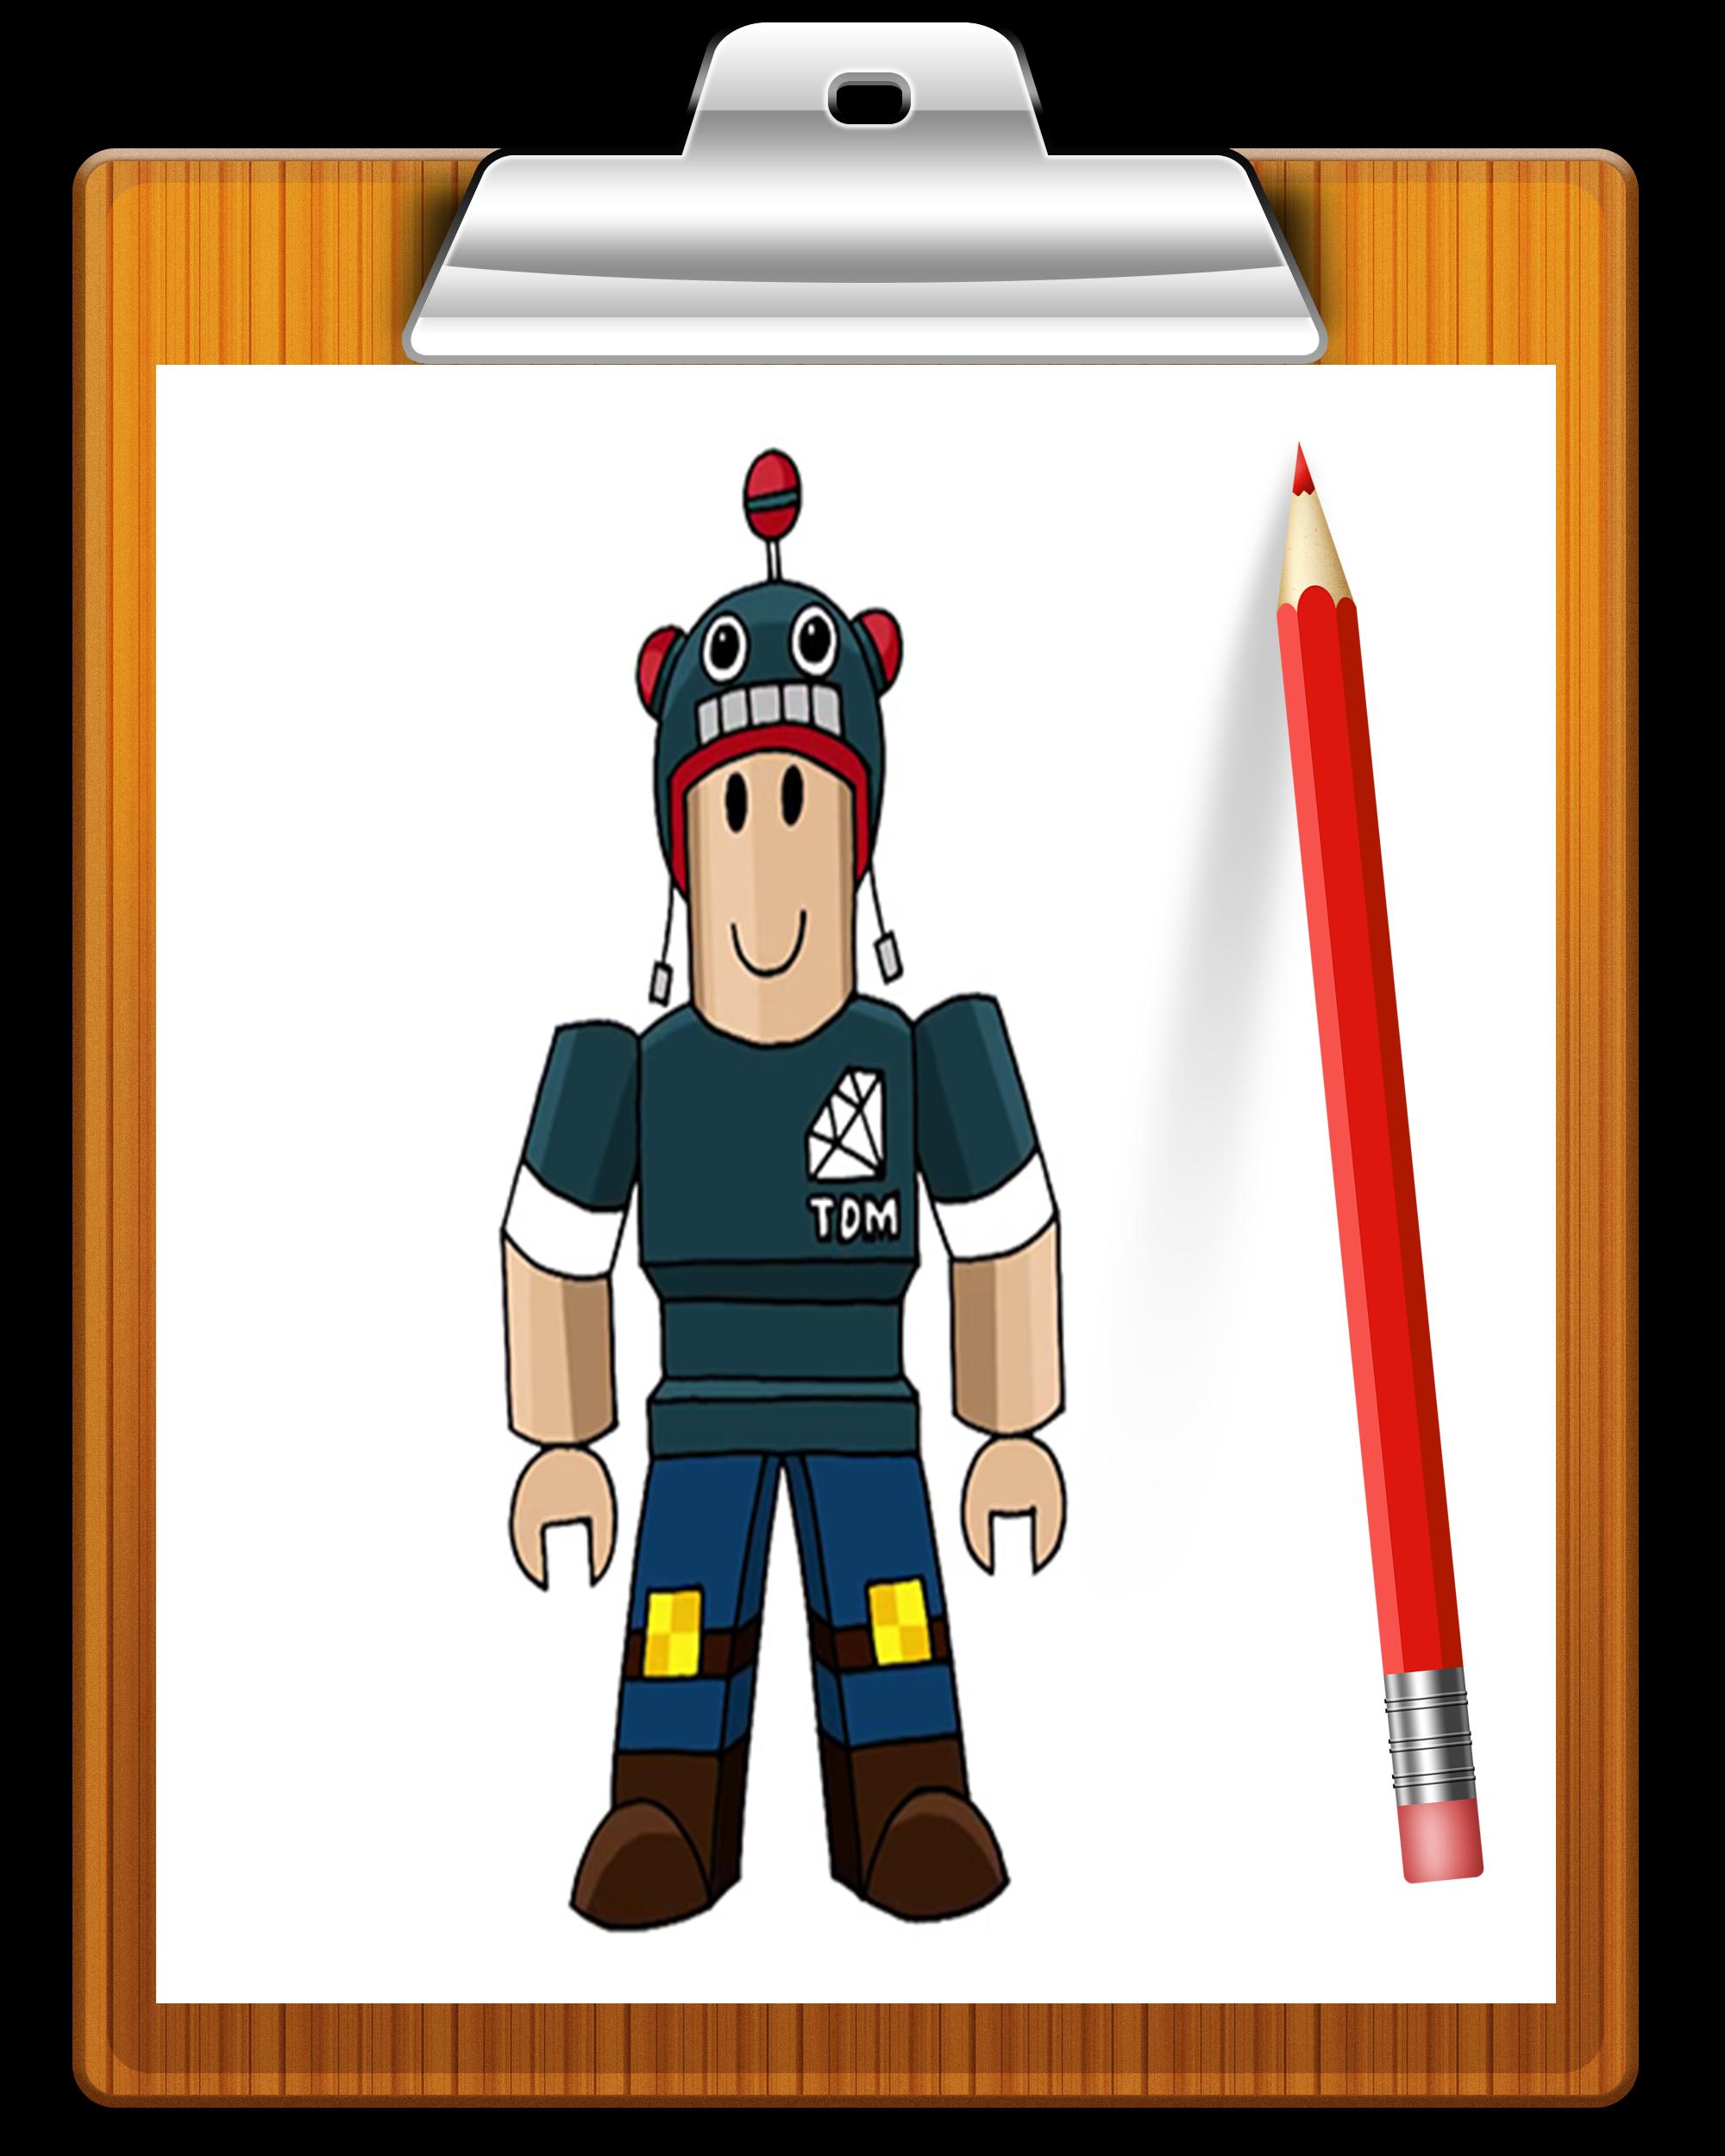 How To Draw Roblox For Android Apk Download - roblox apk apkpure